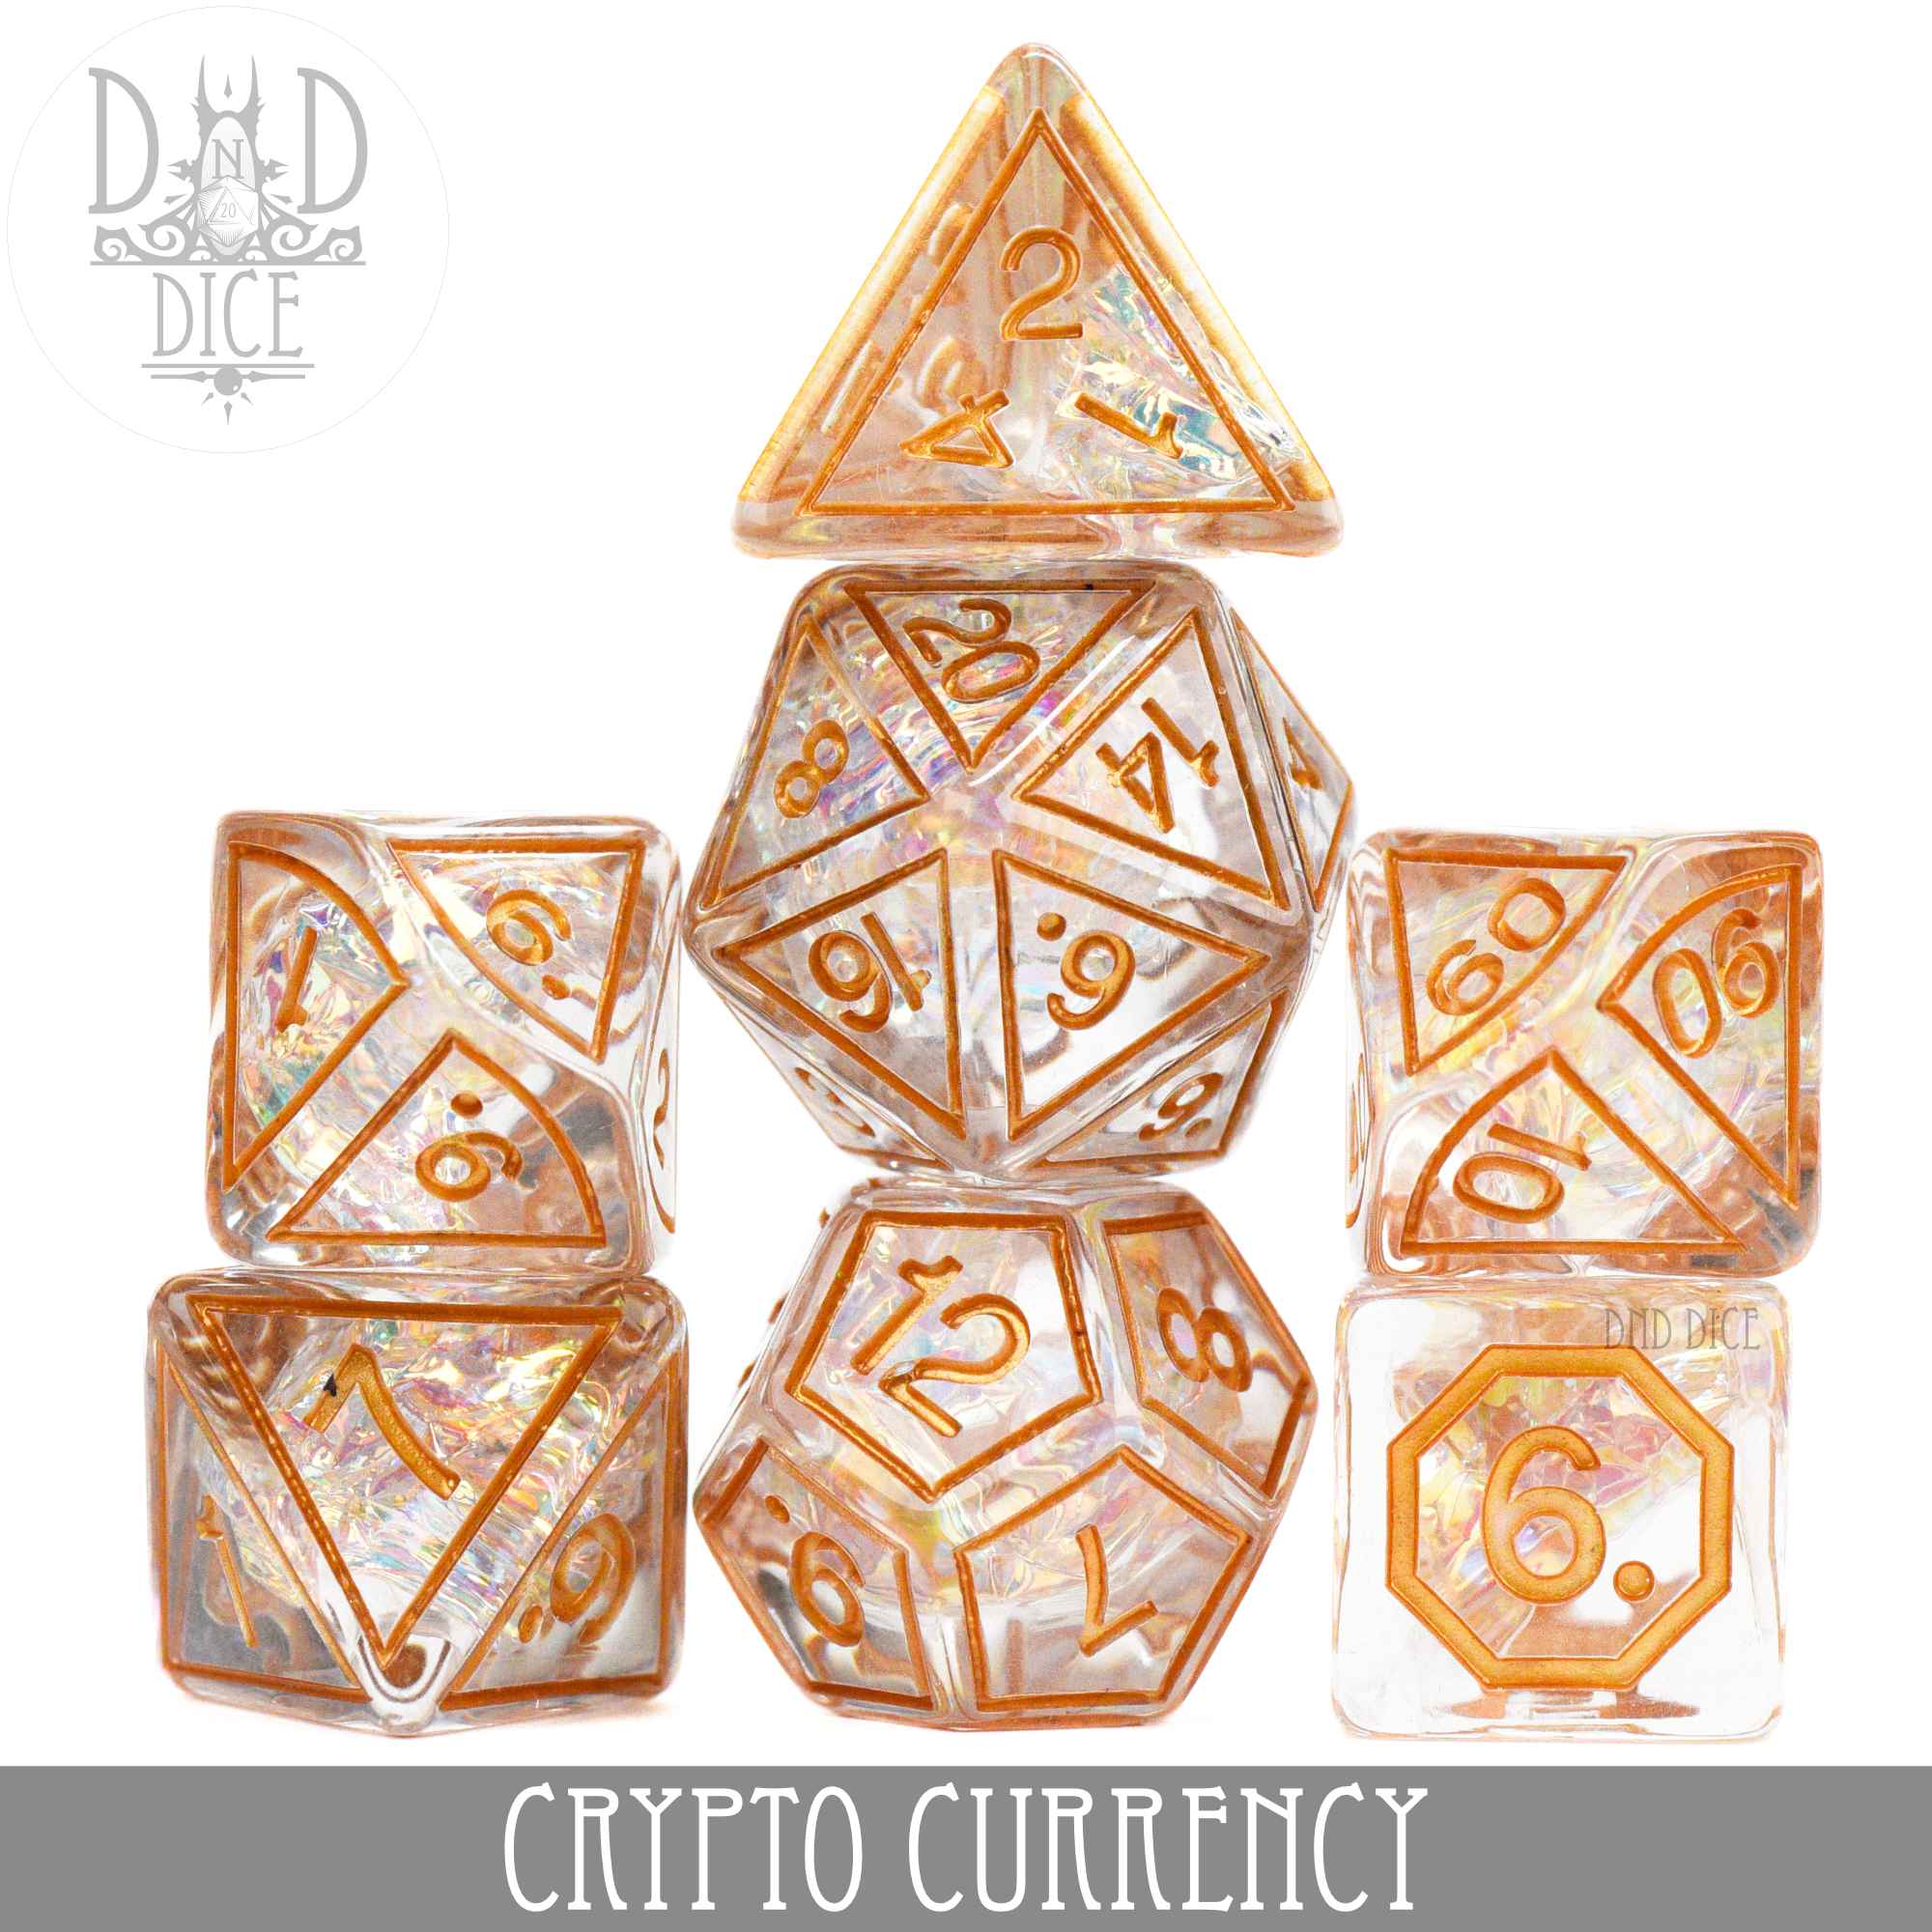 Crypto Currency Dice Set